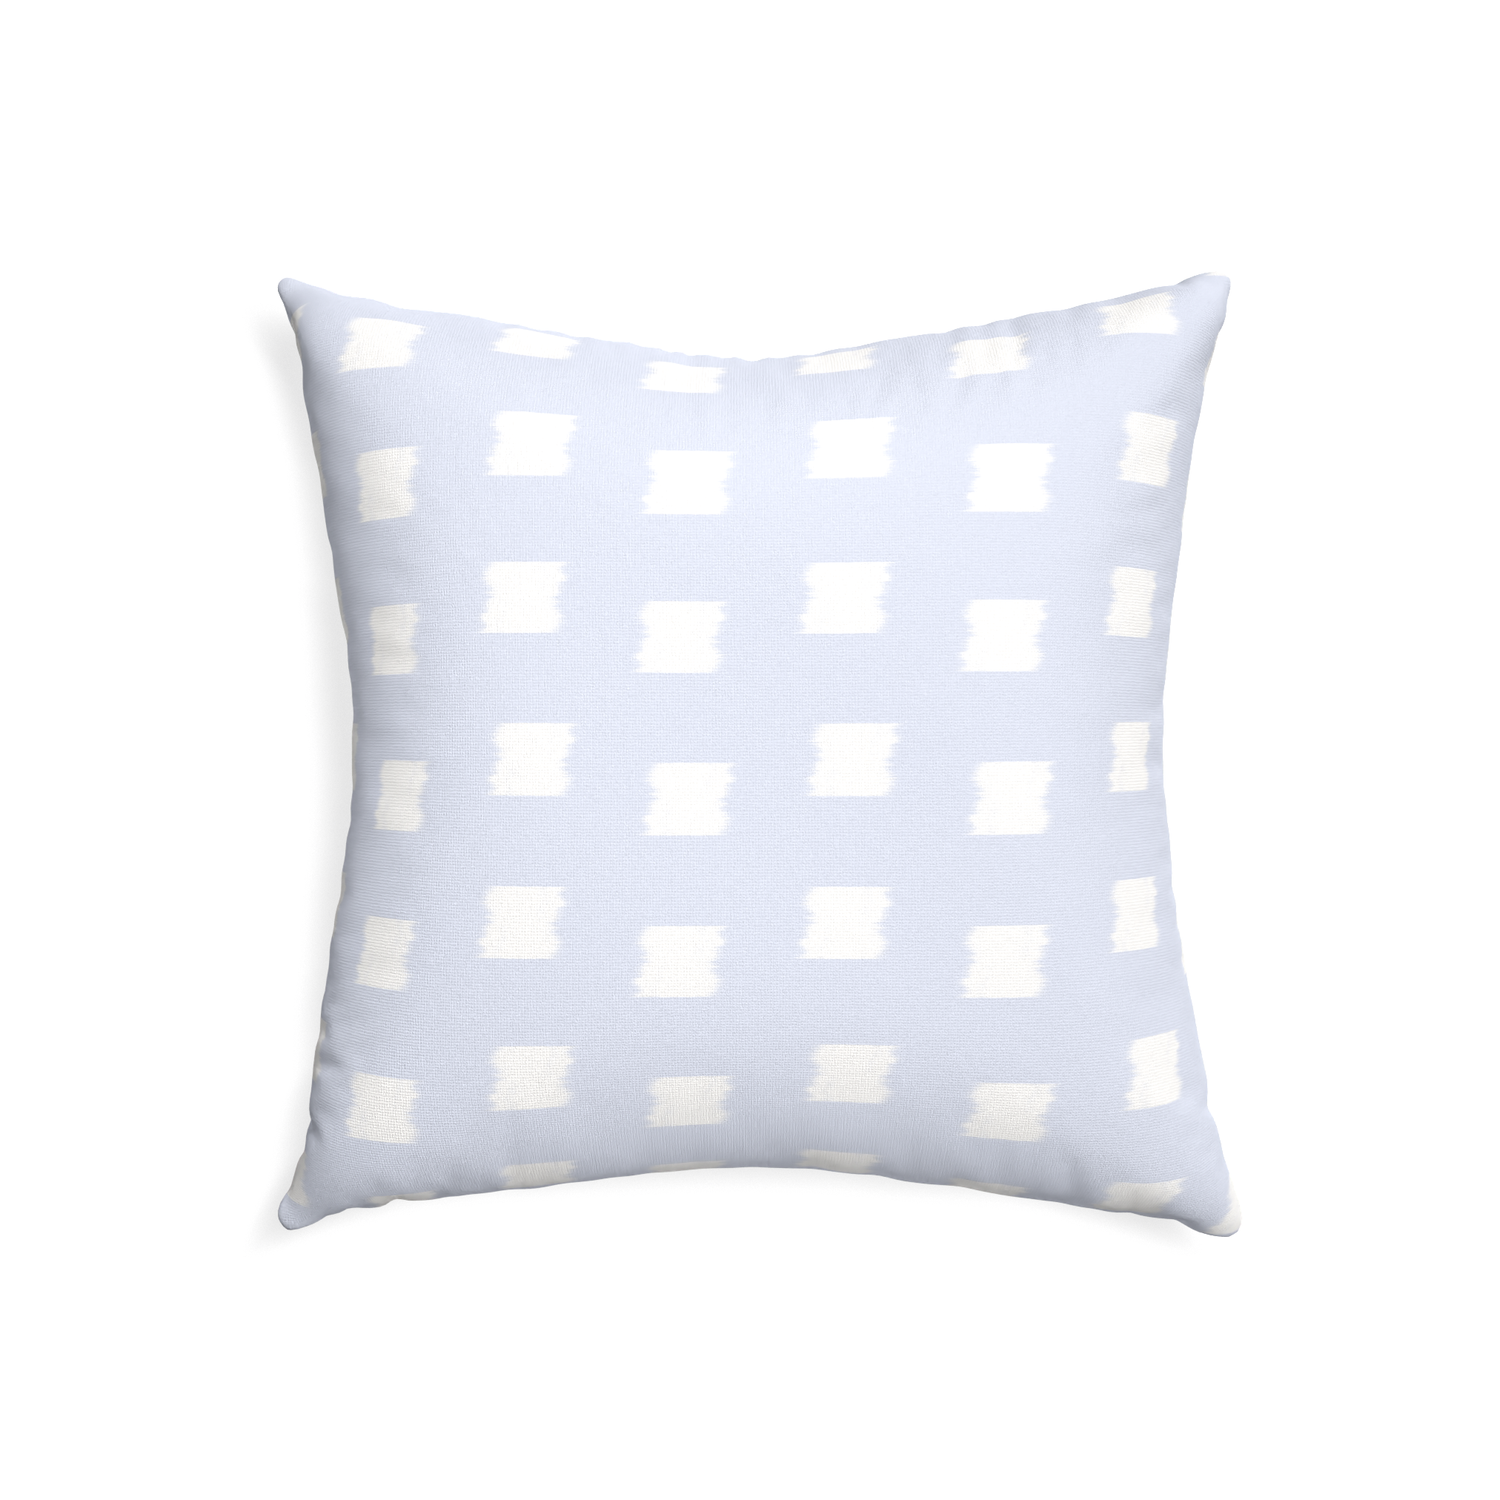 22-square denton custom pillow with none on white background